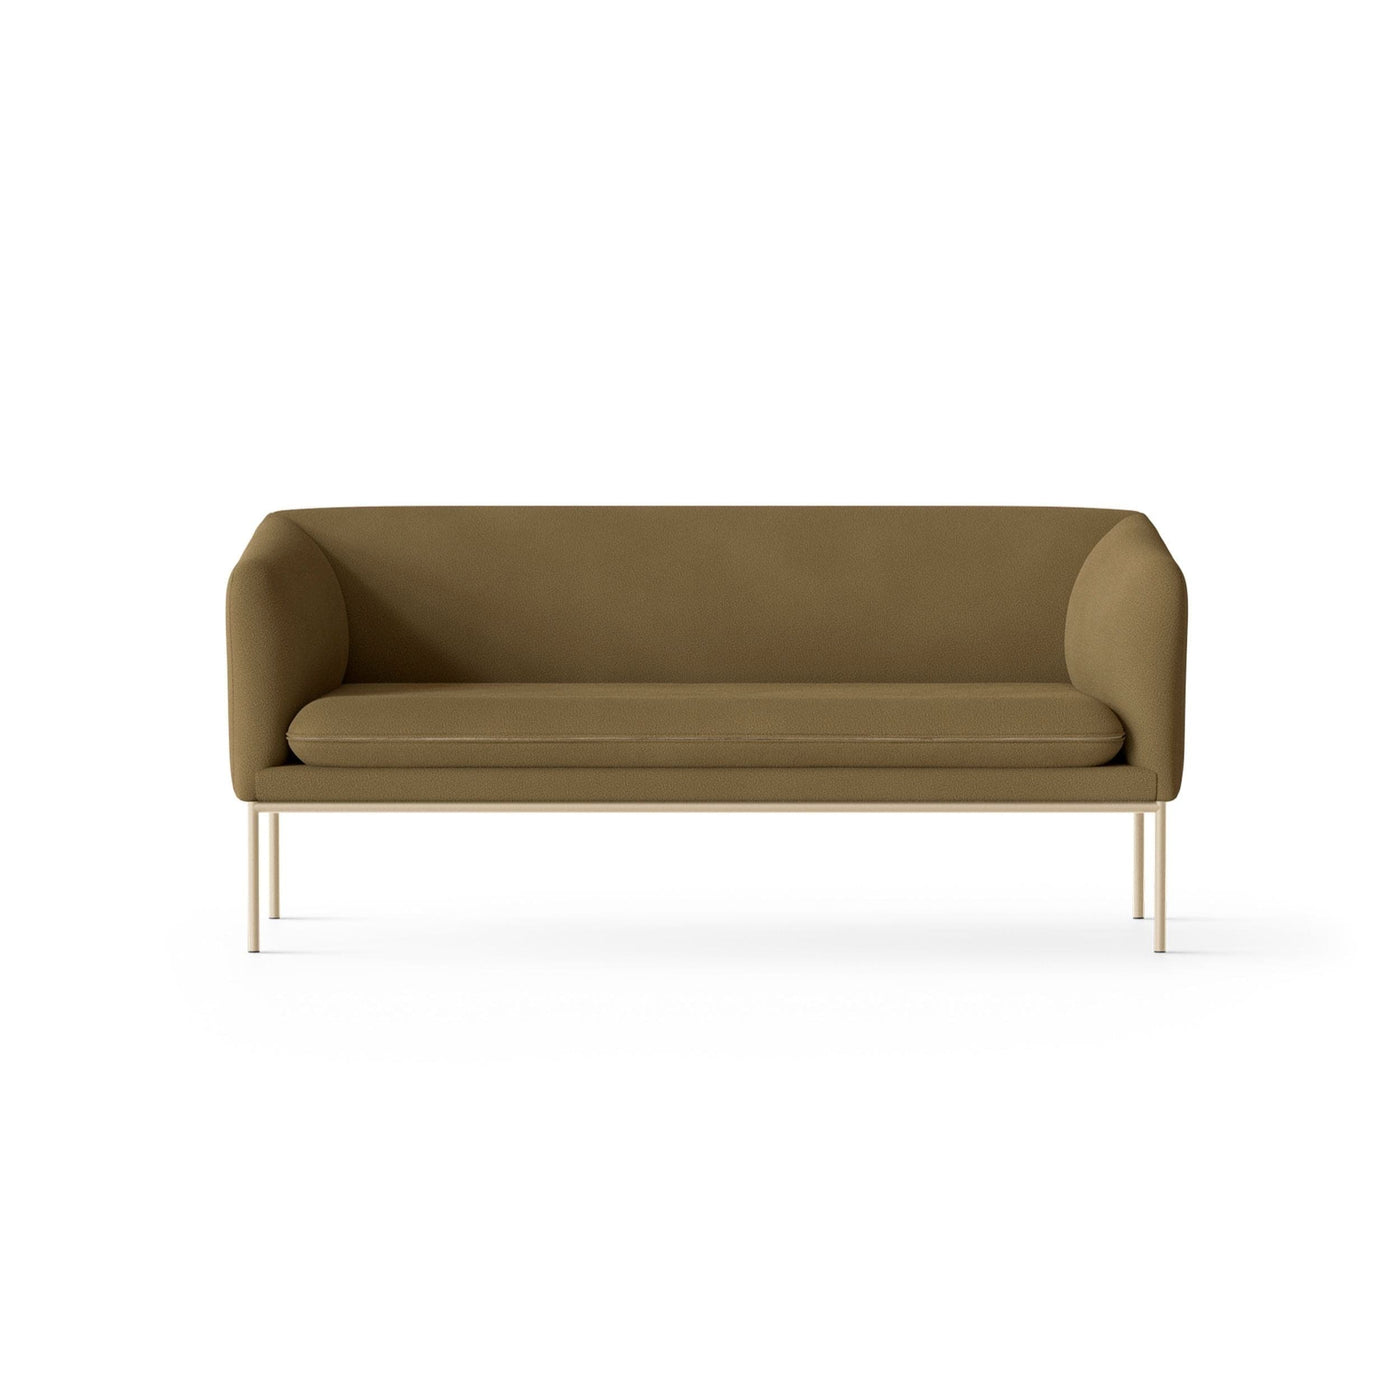 Ferm Living Turn 2 Seater sofa with cashmere frame. Made to order from someday designs. 